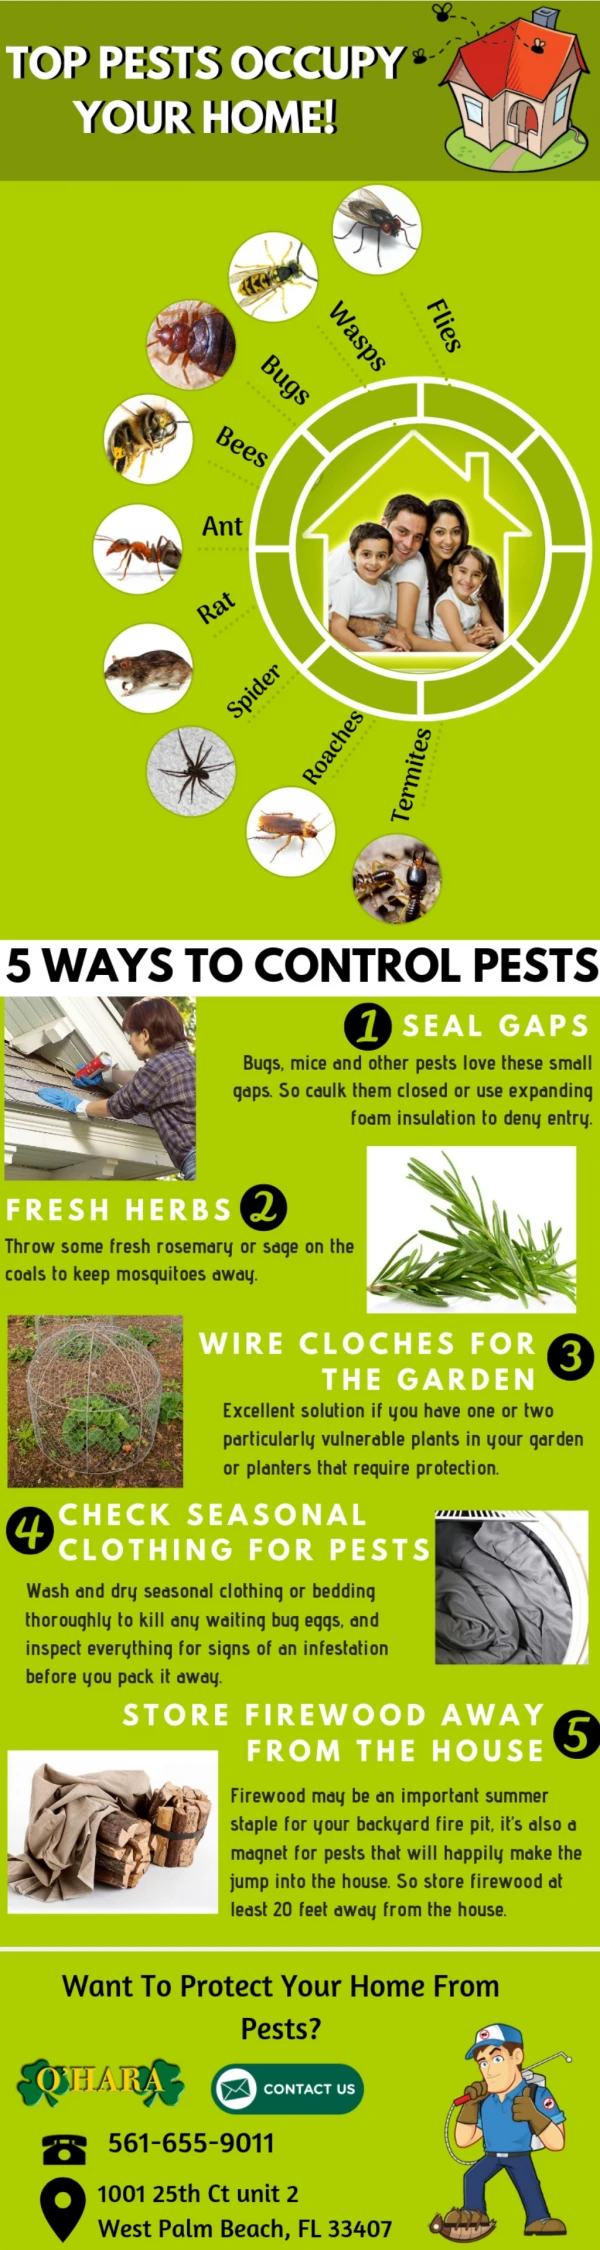 Tips to Keep Pests Away In & Around Your Home